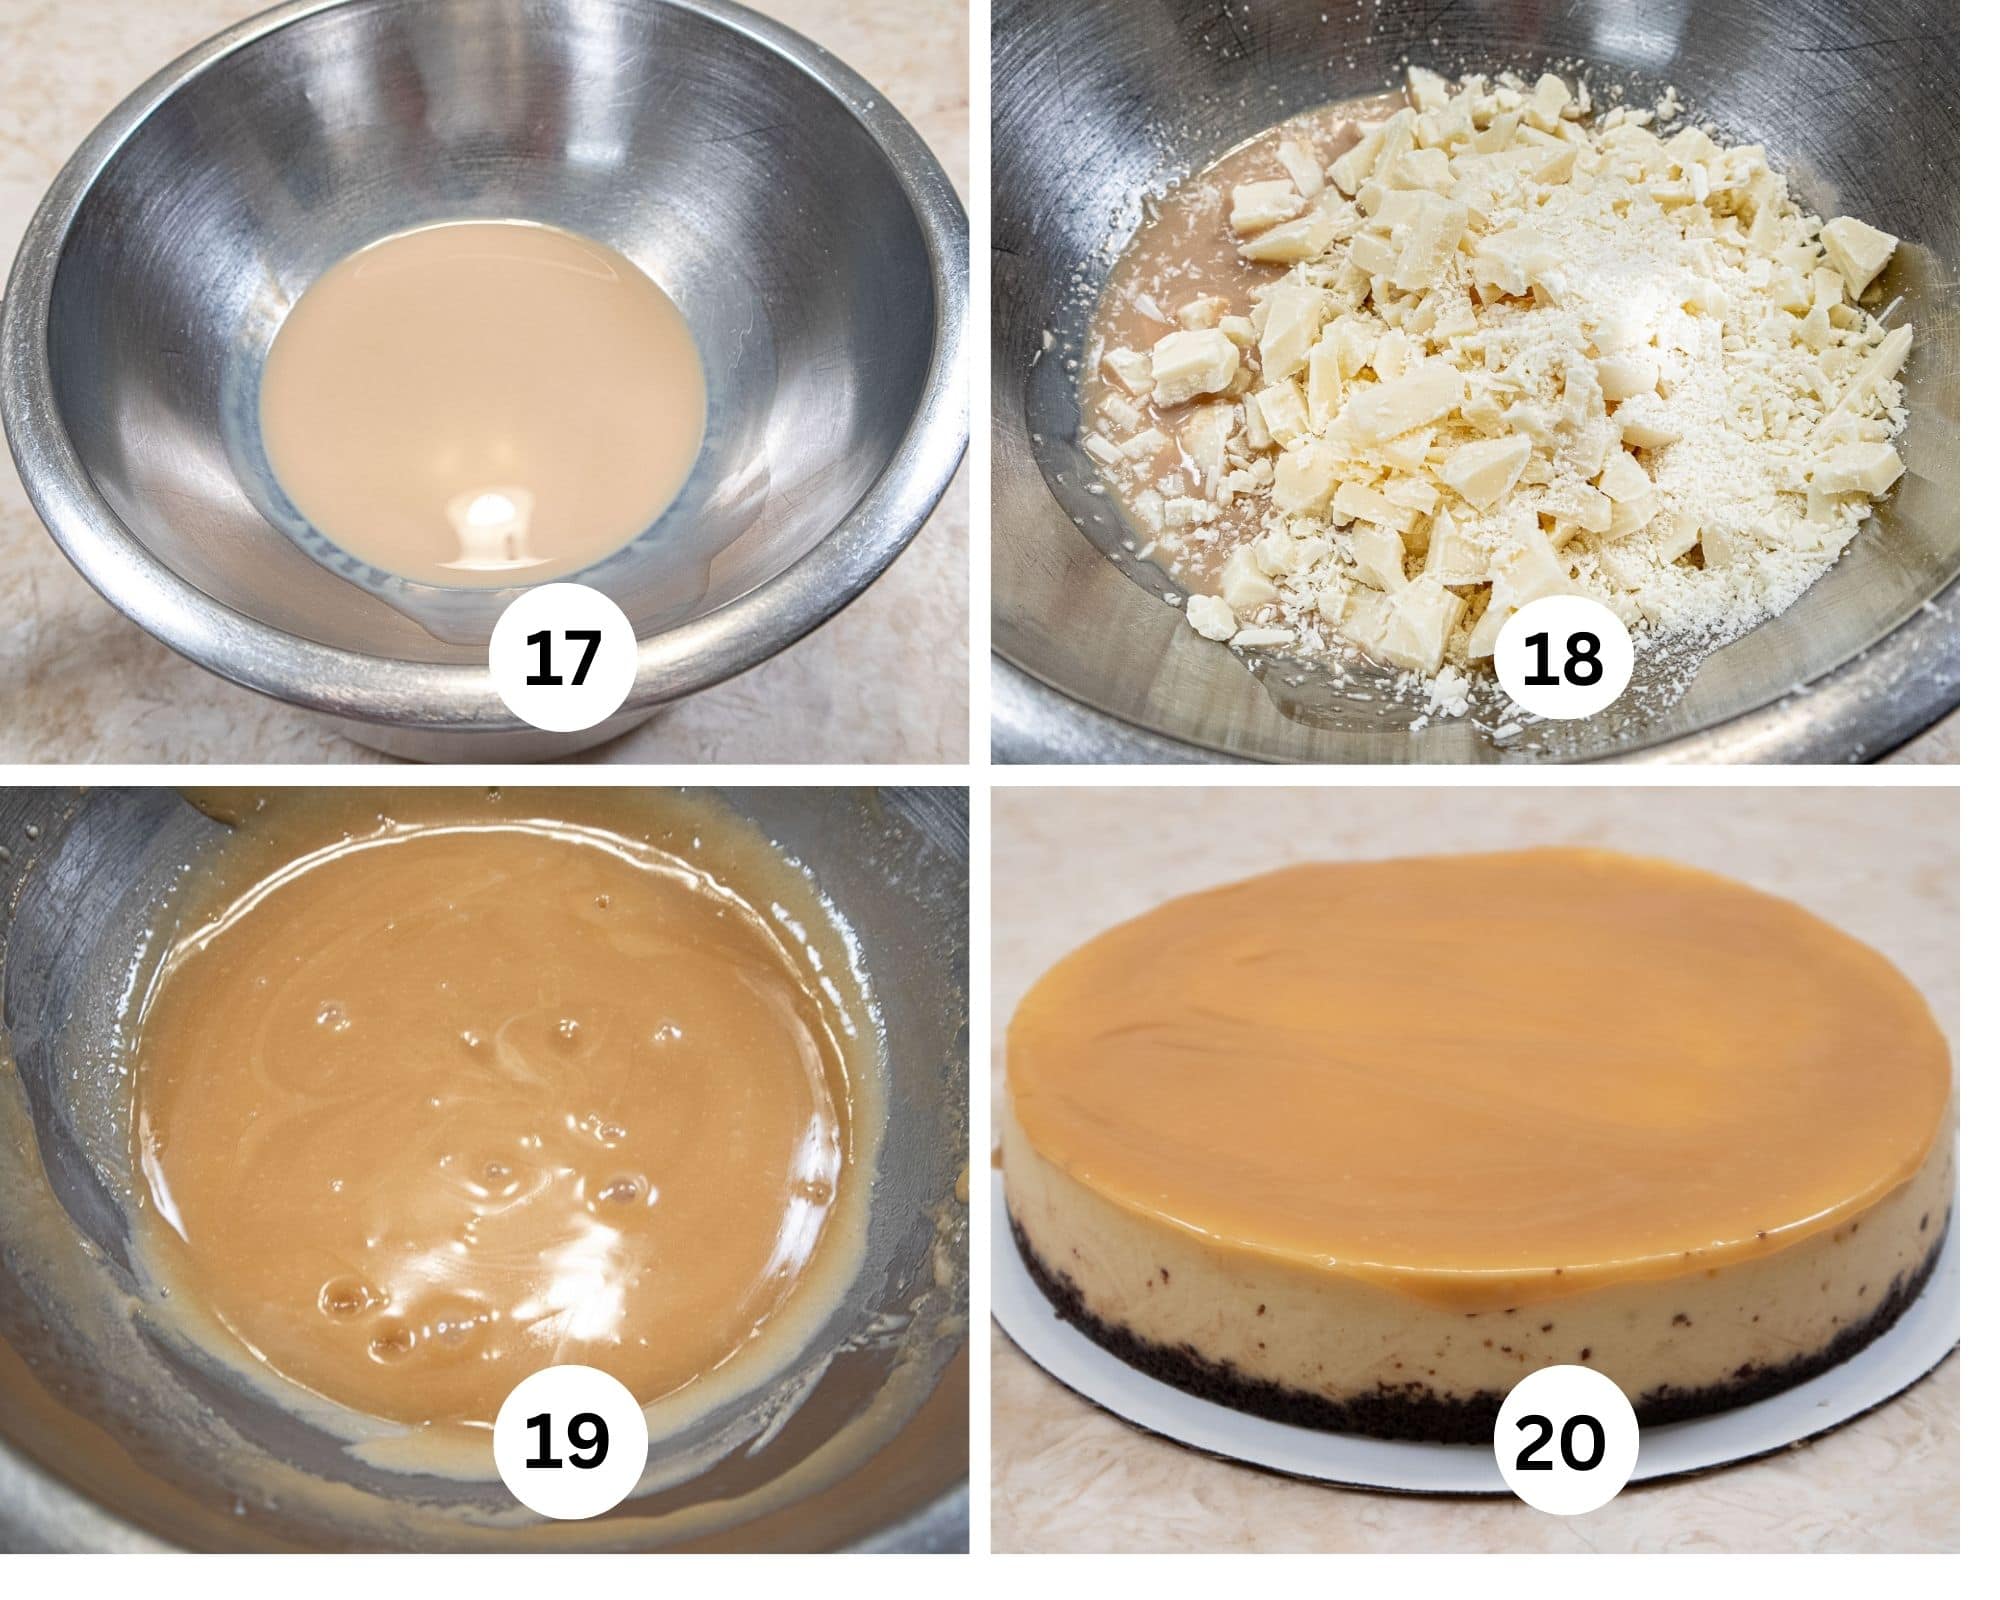 The last collage shows the Bailey's in a bowl over a double boiler, the white chocolate added to the bowl, the finished glaze and the cheesecake topped with the glaze. 